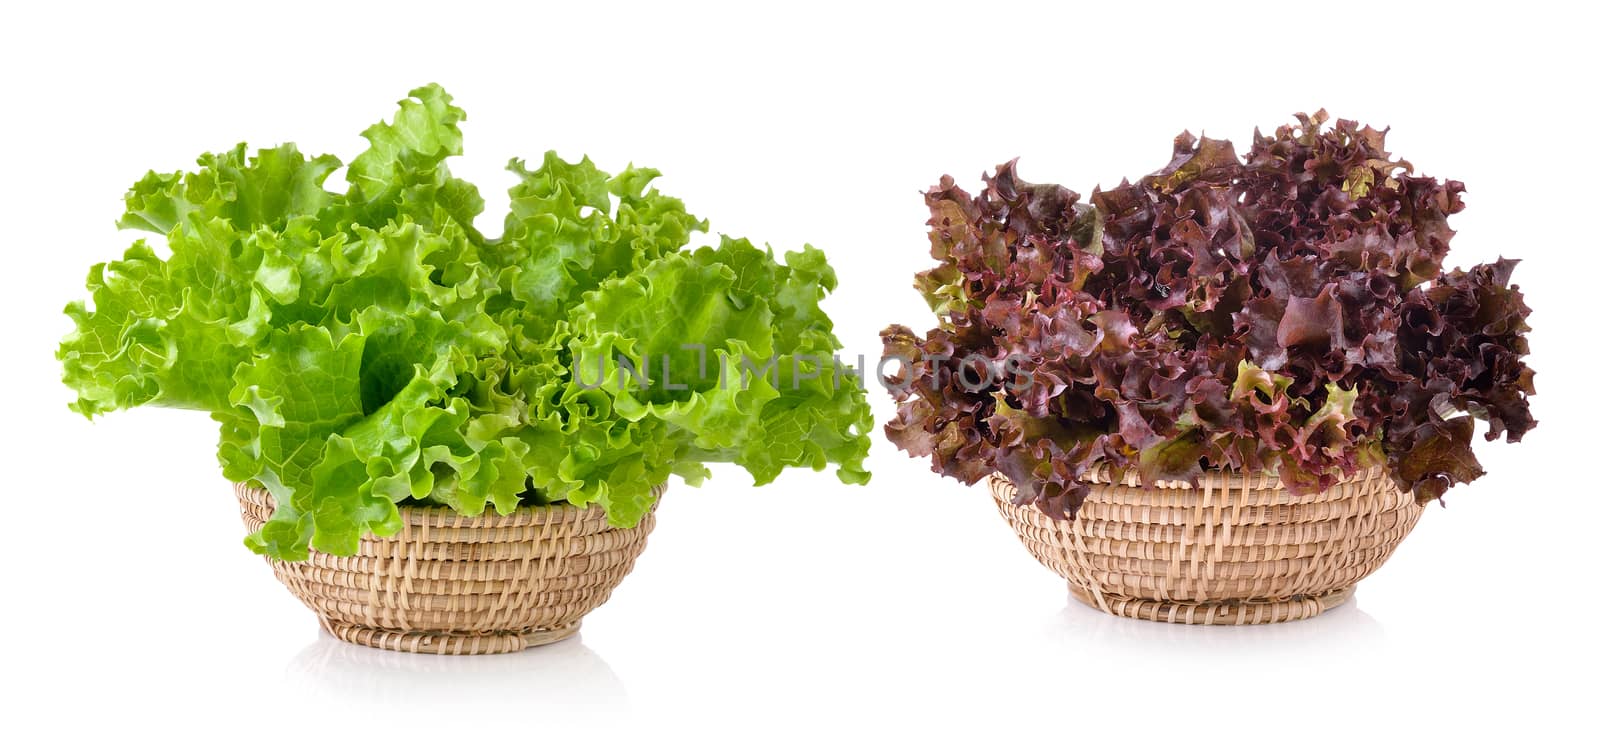 Fresh red lettuce in the basket isolated on a white background by sommai